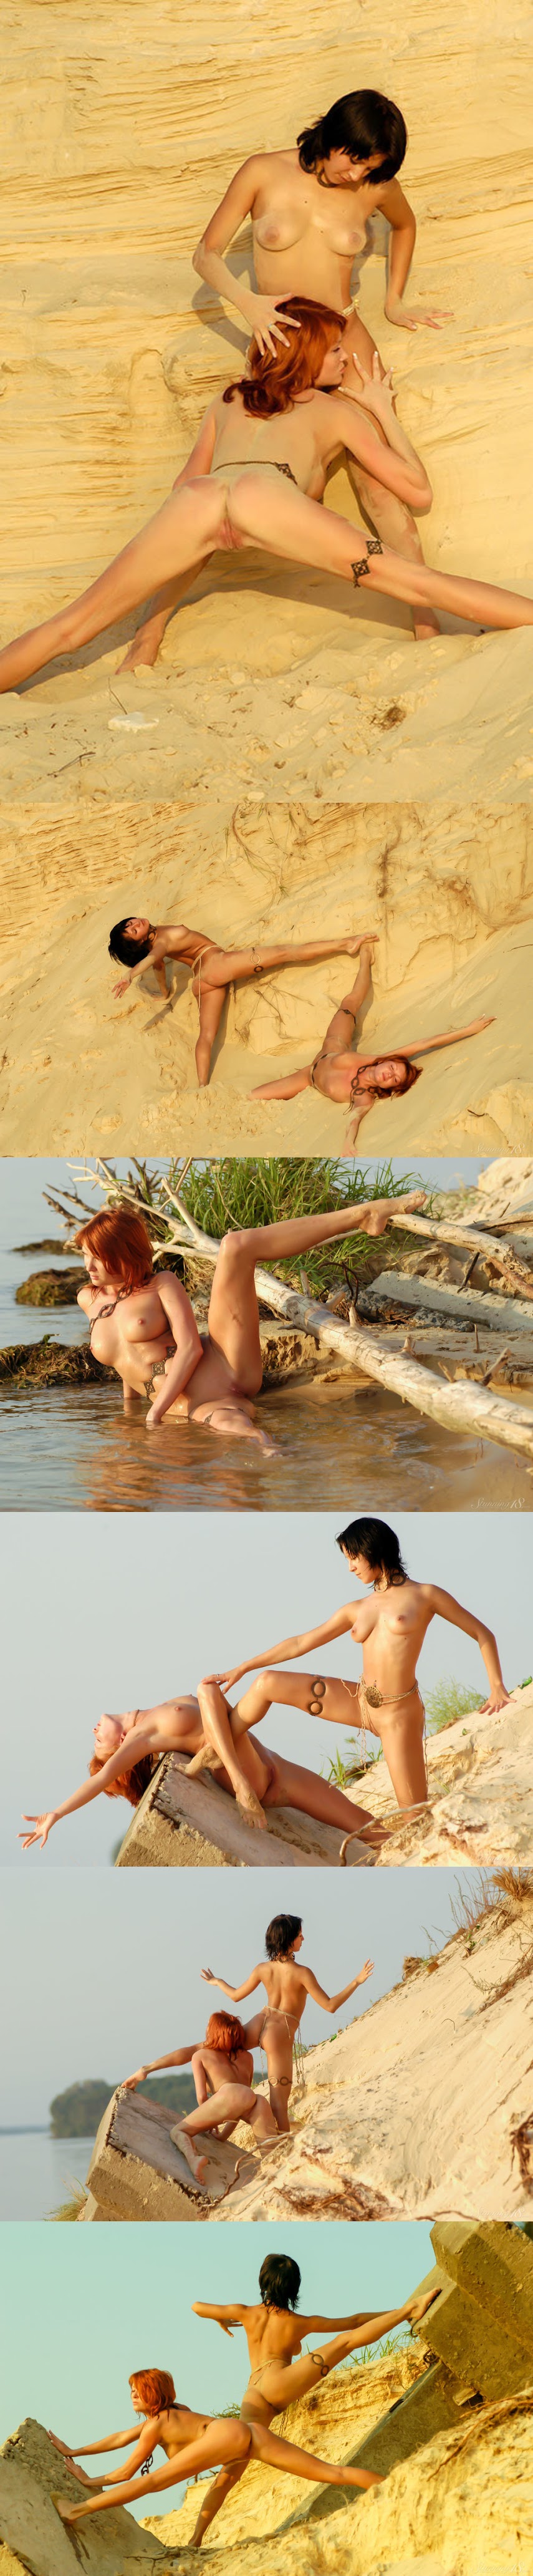 0486502917 [Stunning18] Layna - Posing in the Sand